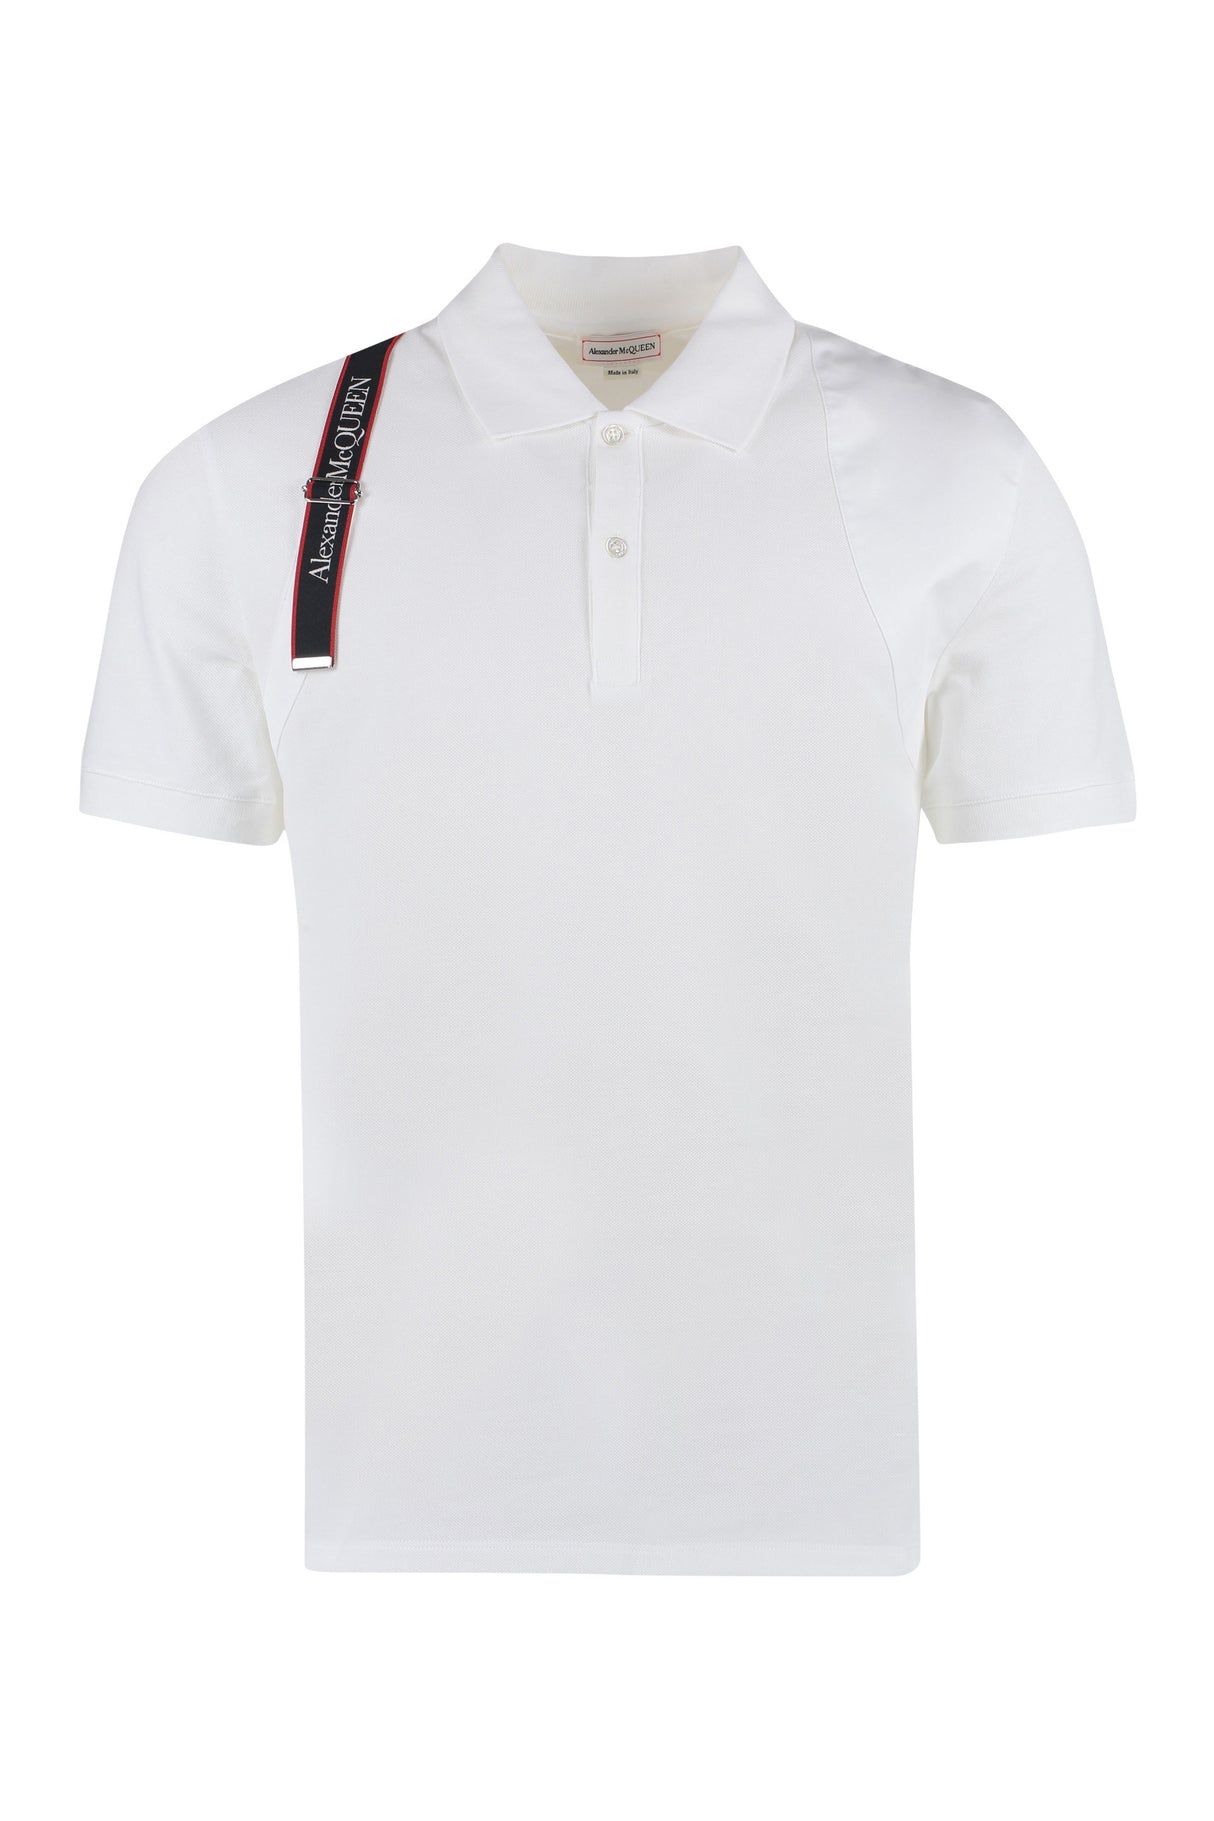 ALEXANDER MCQUEEN Men's Pique Polo Shirt with Harness Detailing in White